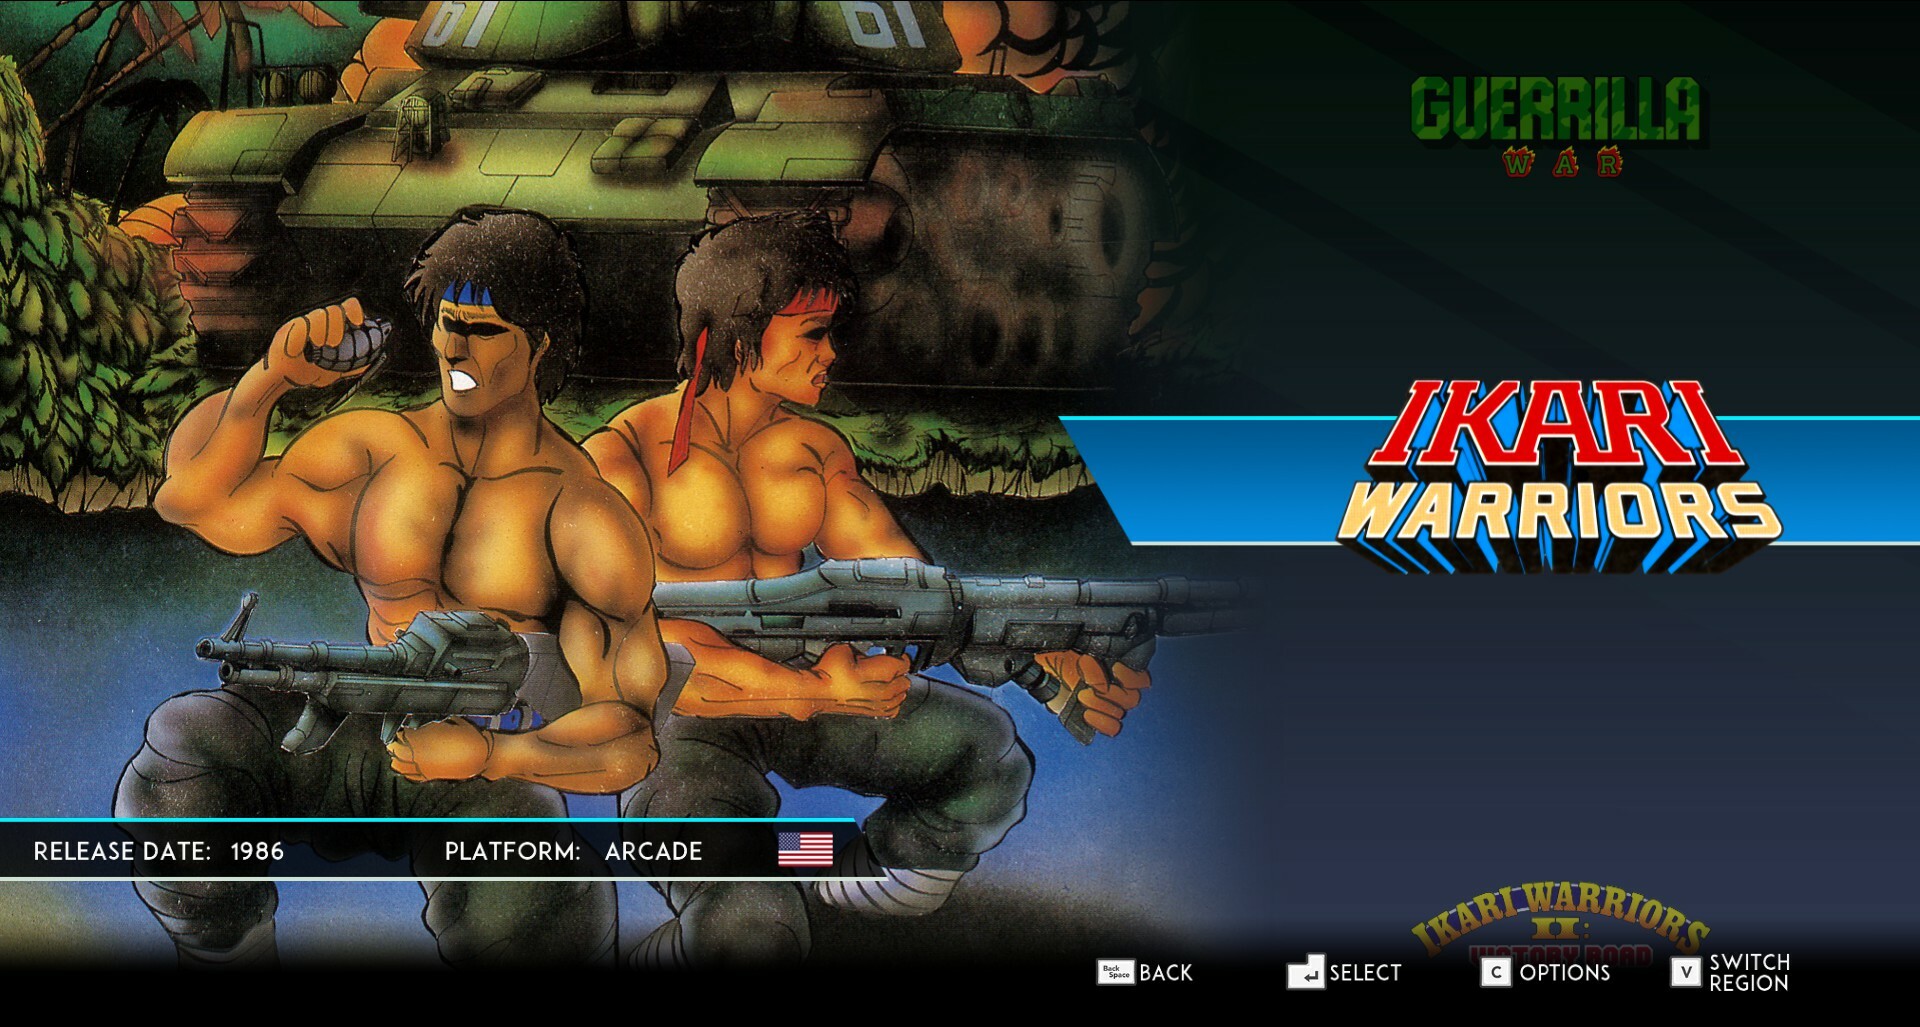 SNK 40th Anniversary Collection screenshot 2